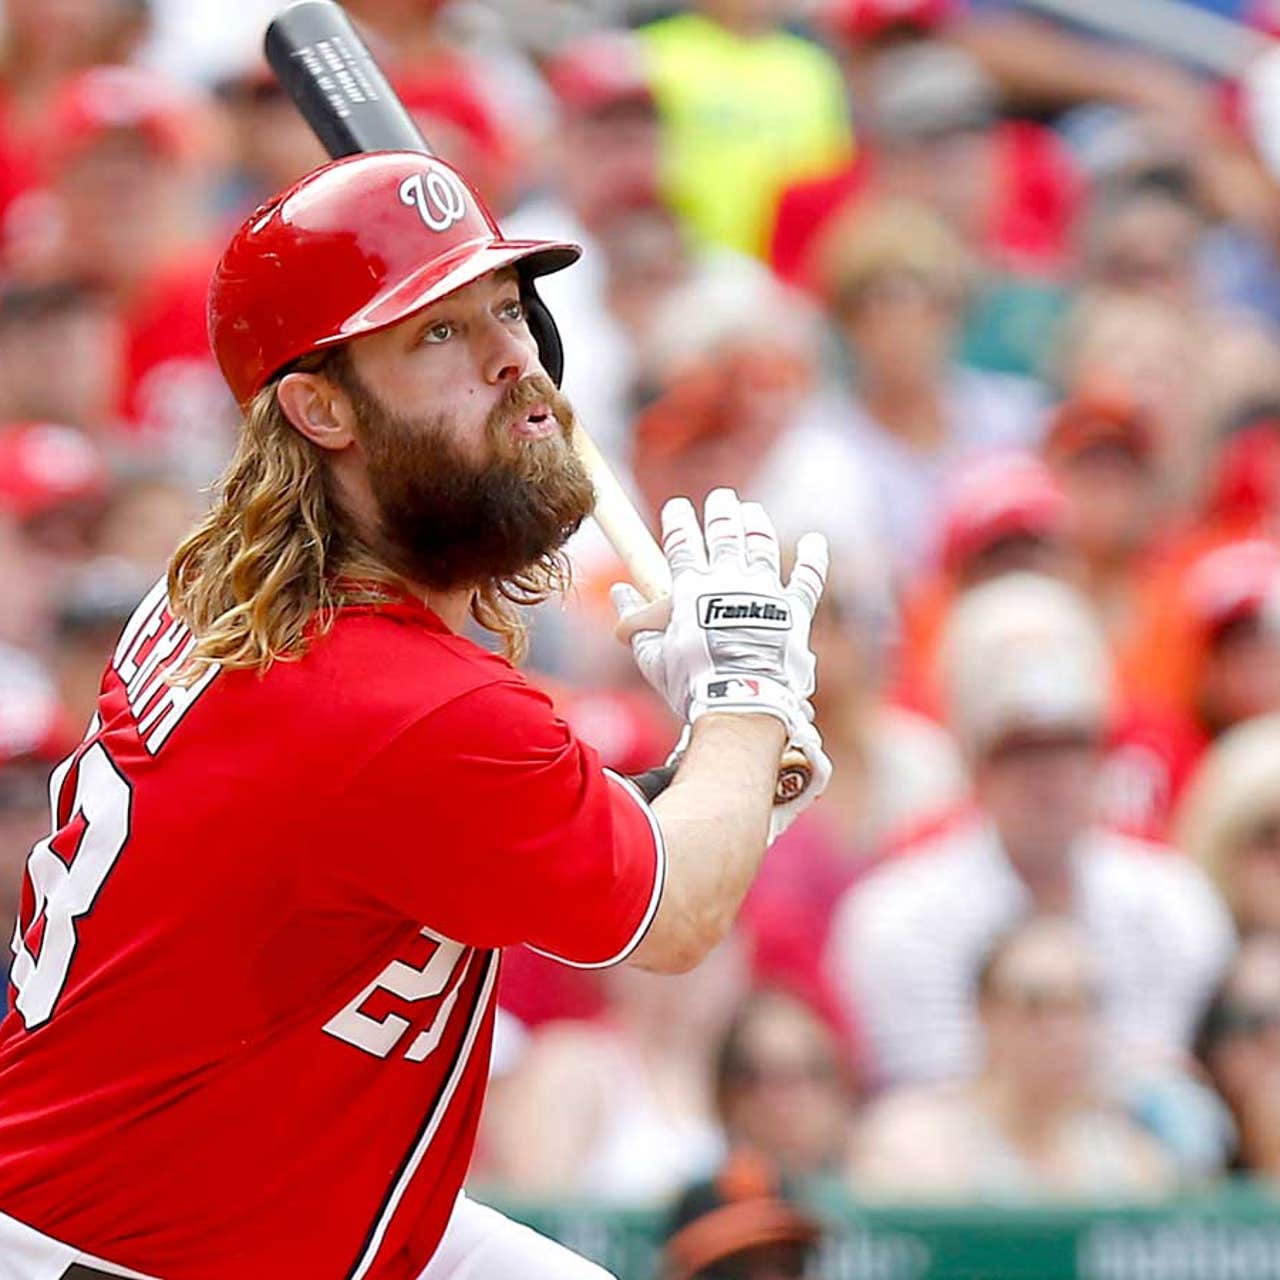 Beard is back: Nationals activate Jayson Werth from DL